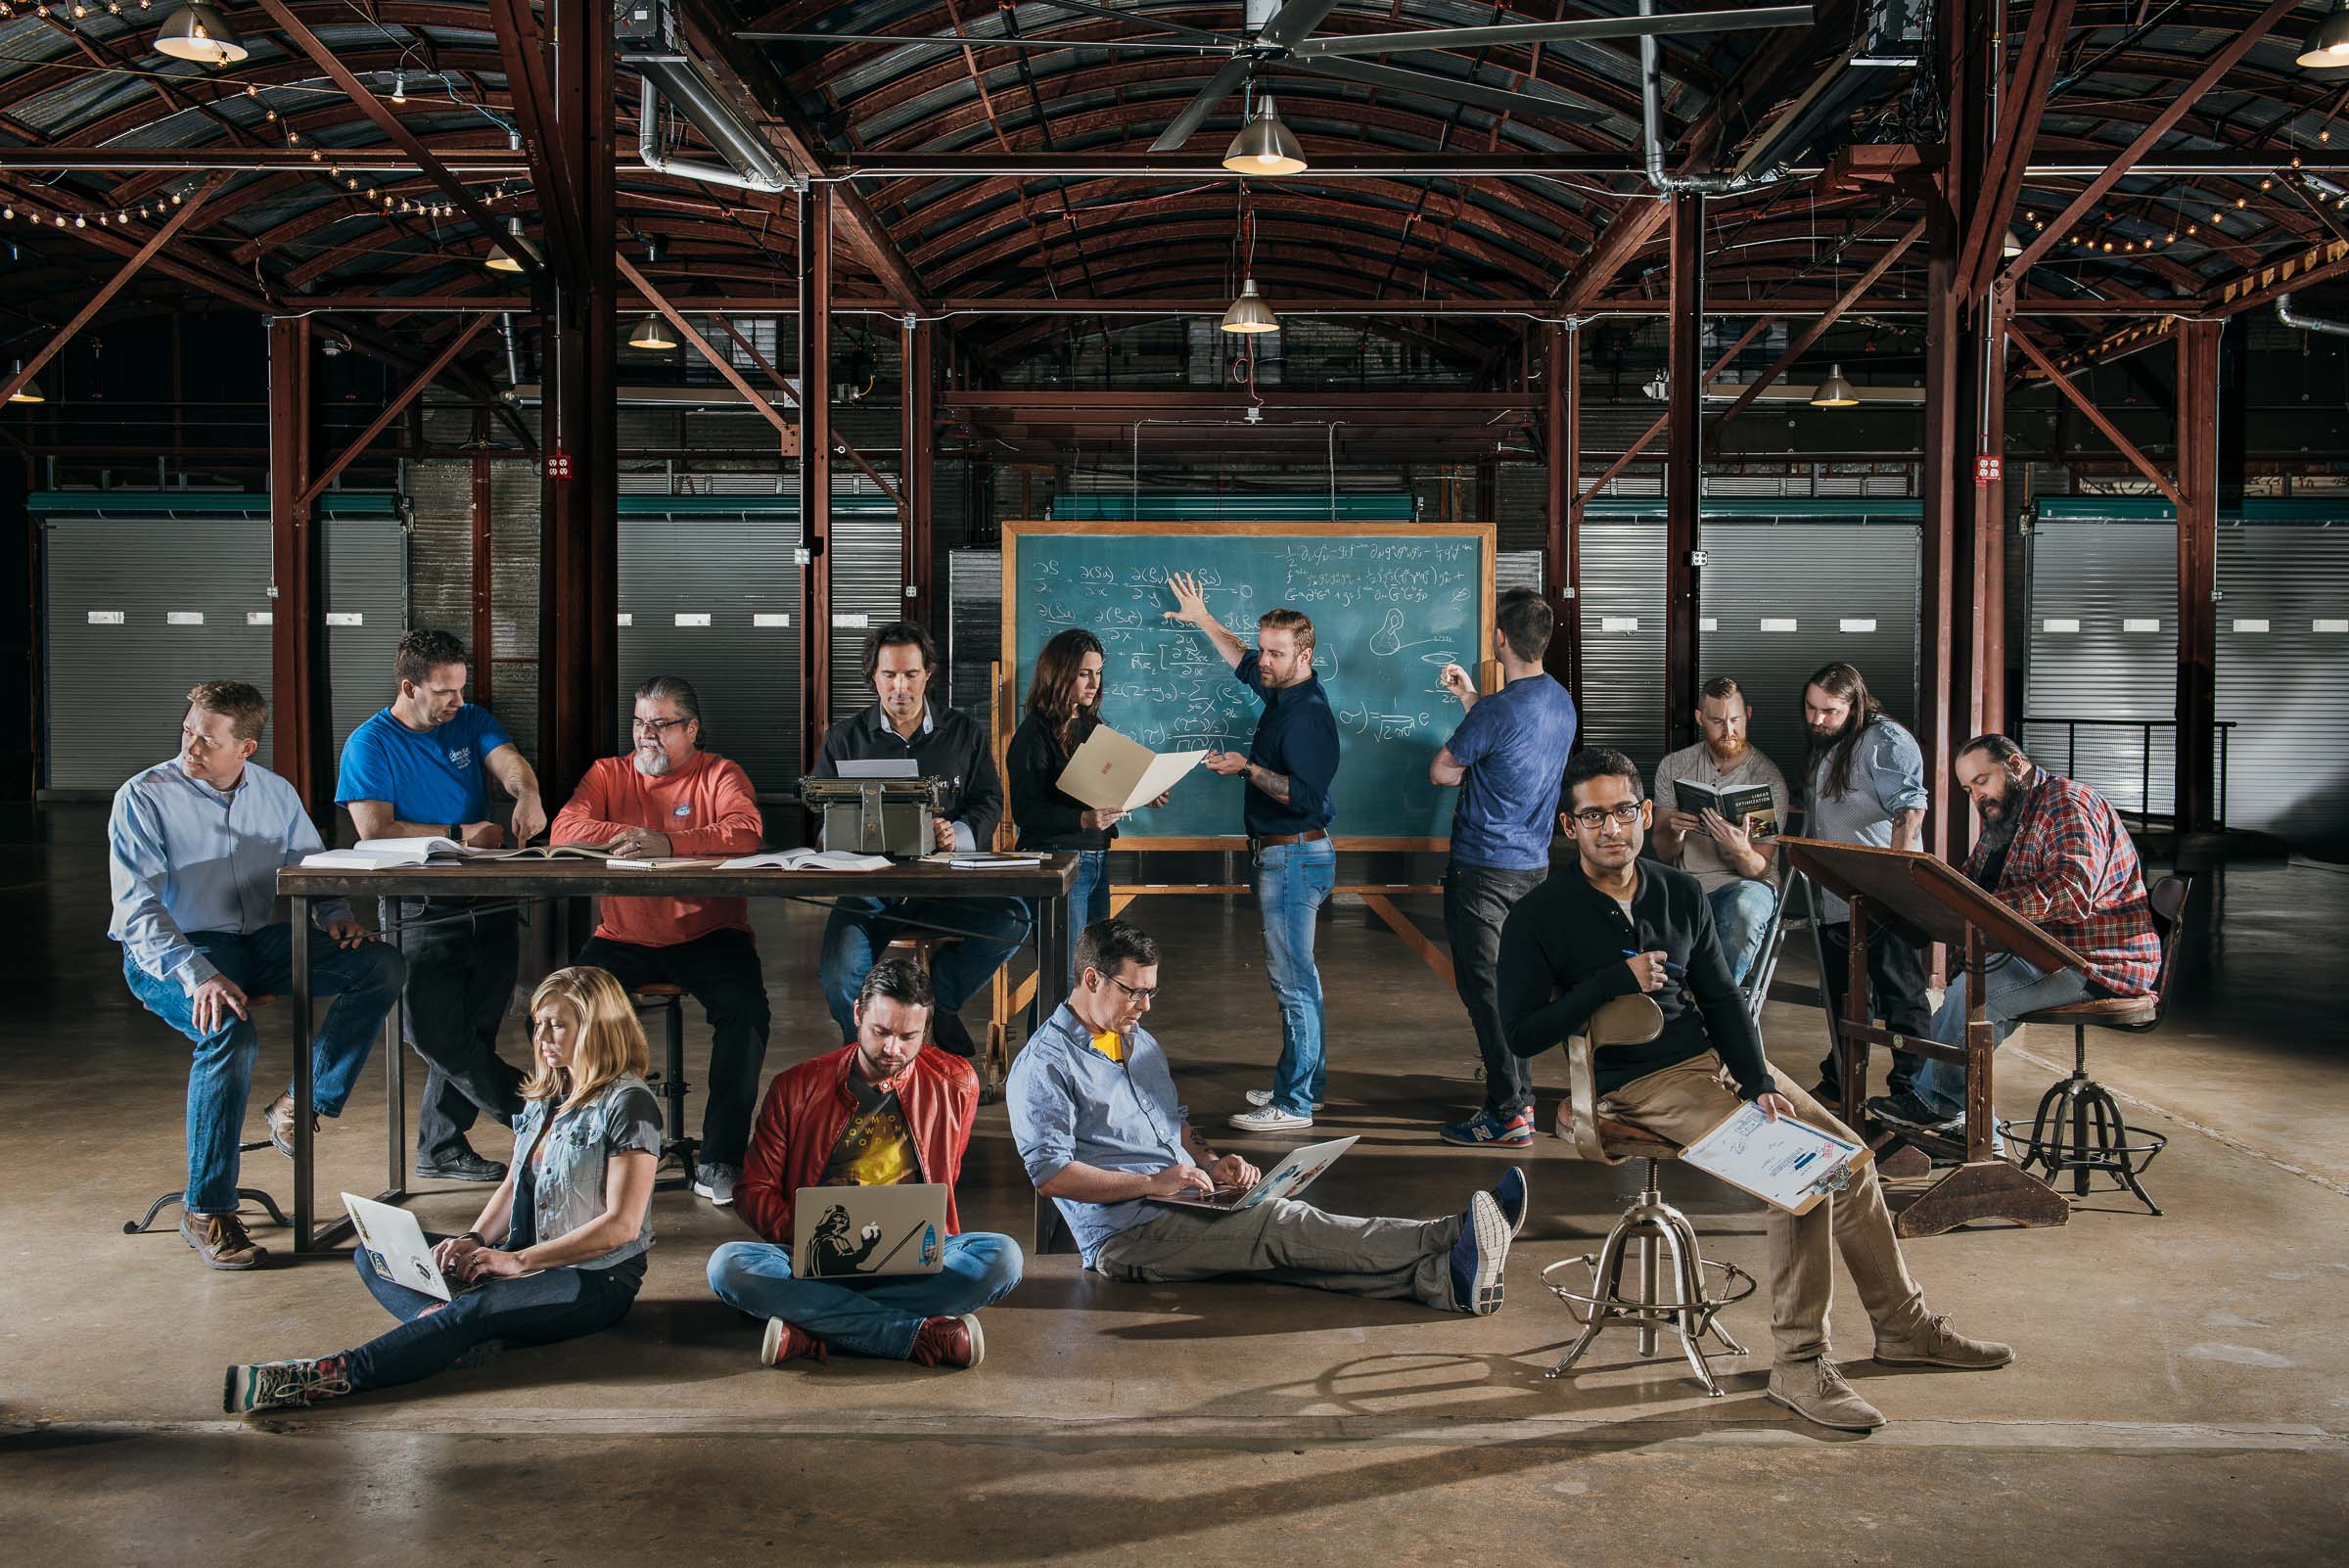 Corporate team portrait - twenty tech workers photographed in a large warehouse space.